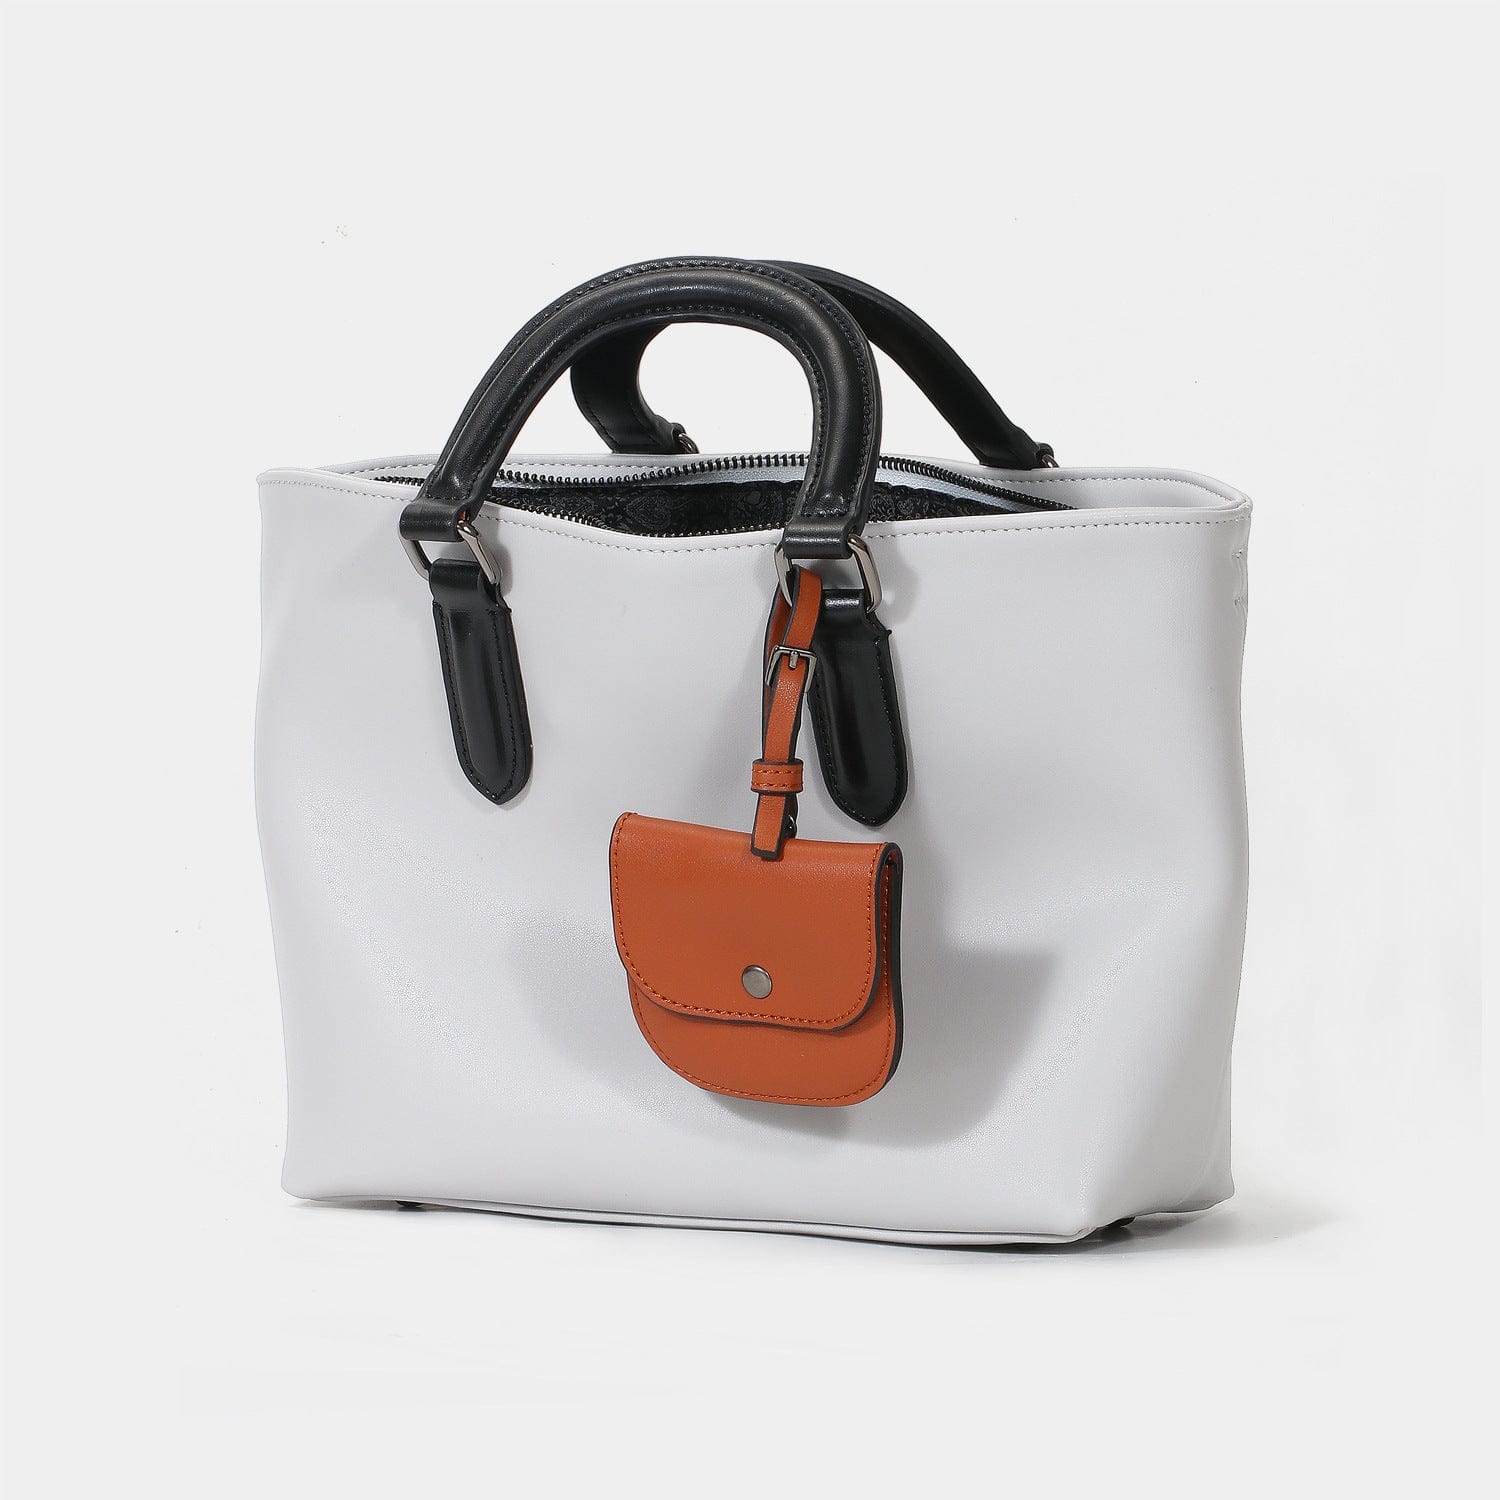 a white and orange purse with a black handle2